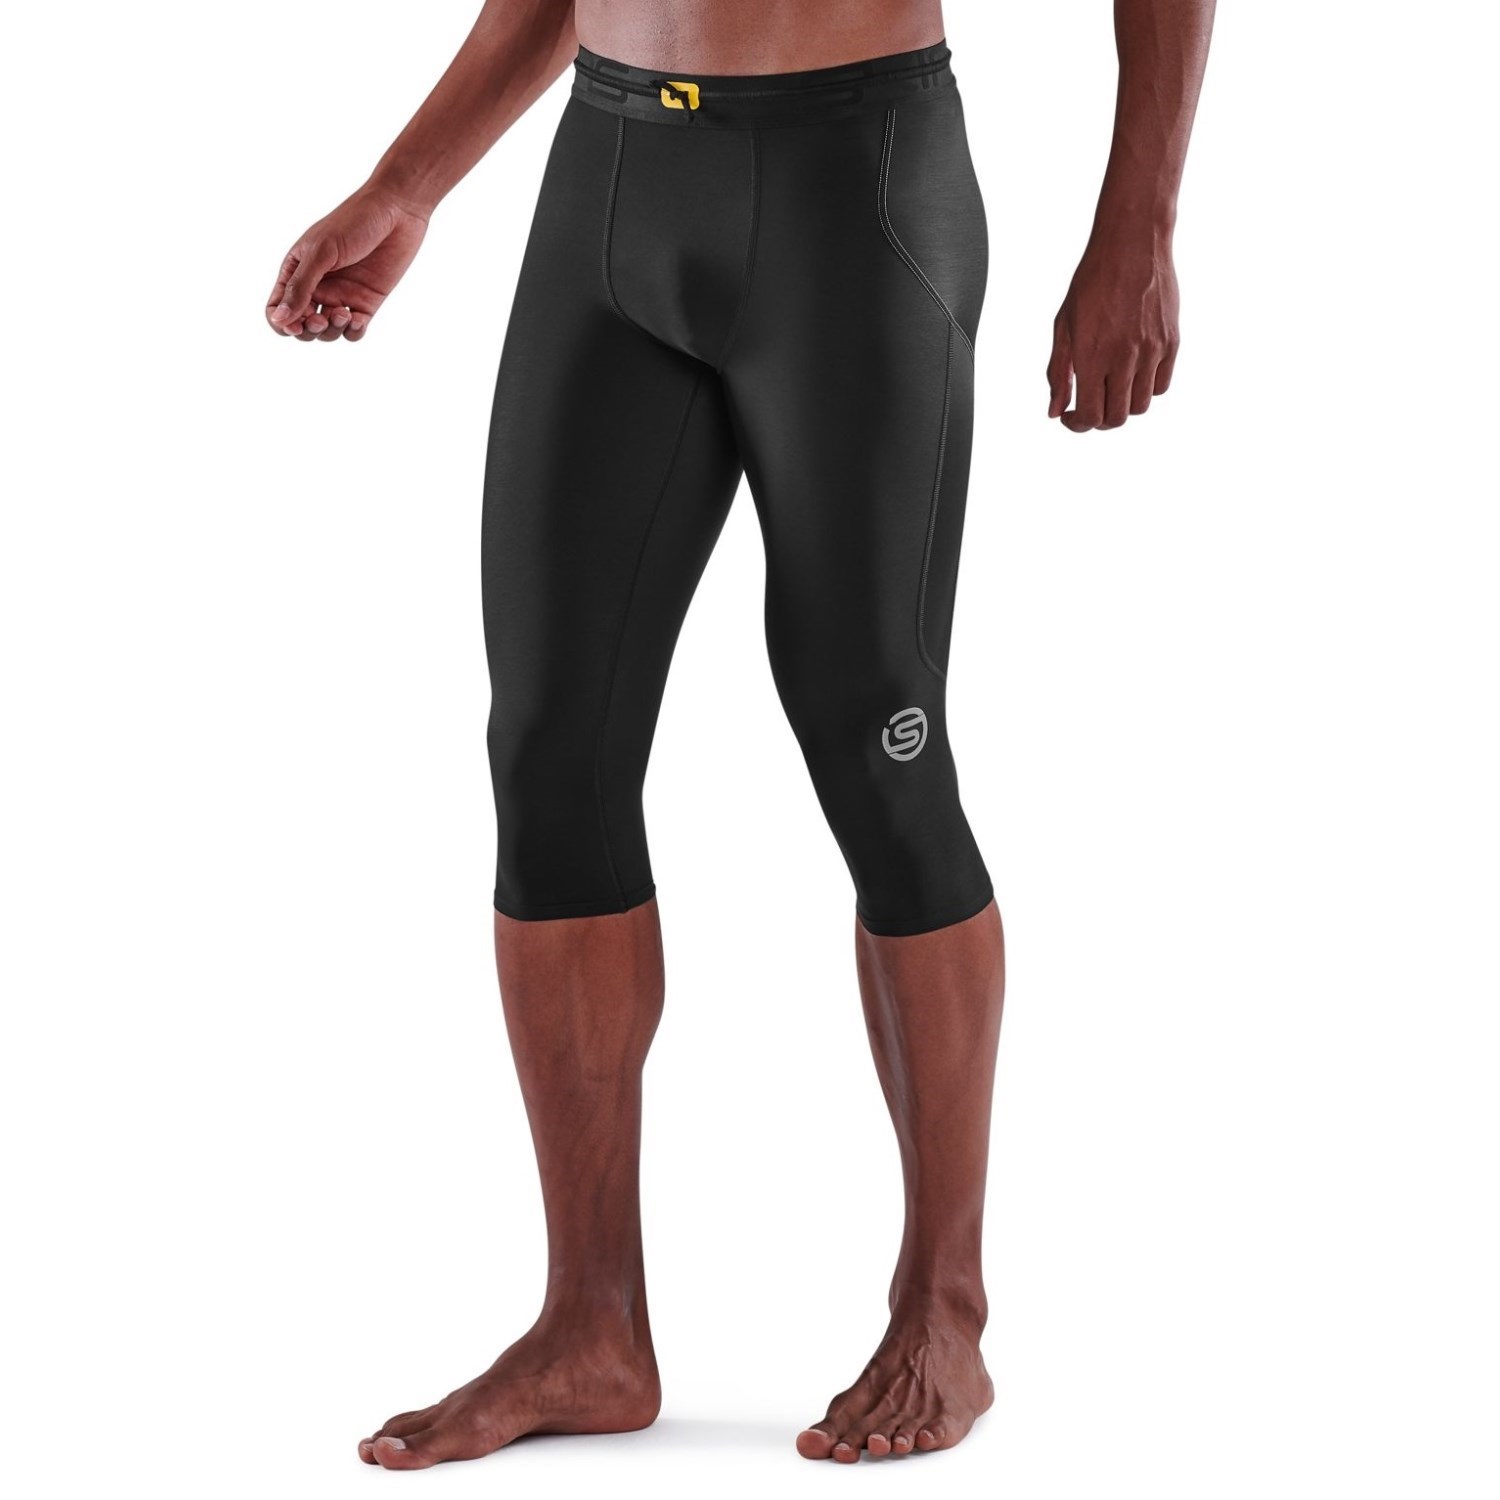  2XU Men's Refresh Recovery Compression Tights, Black/Nero,  Medium : Clothing, Shoes & Jewelry